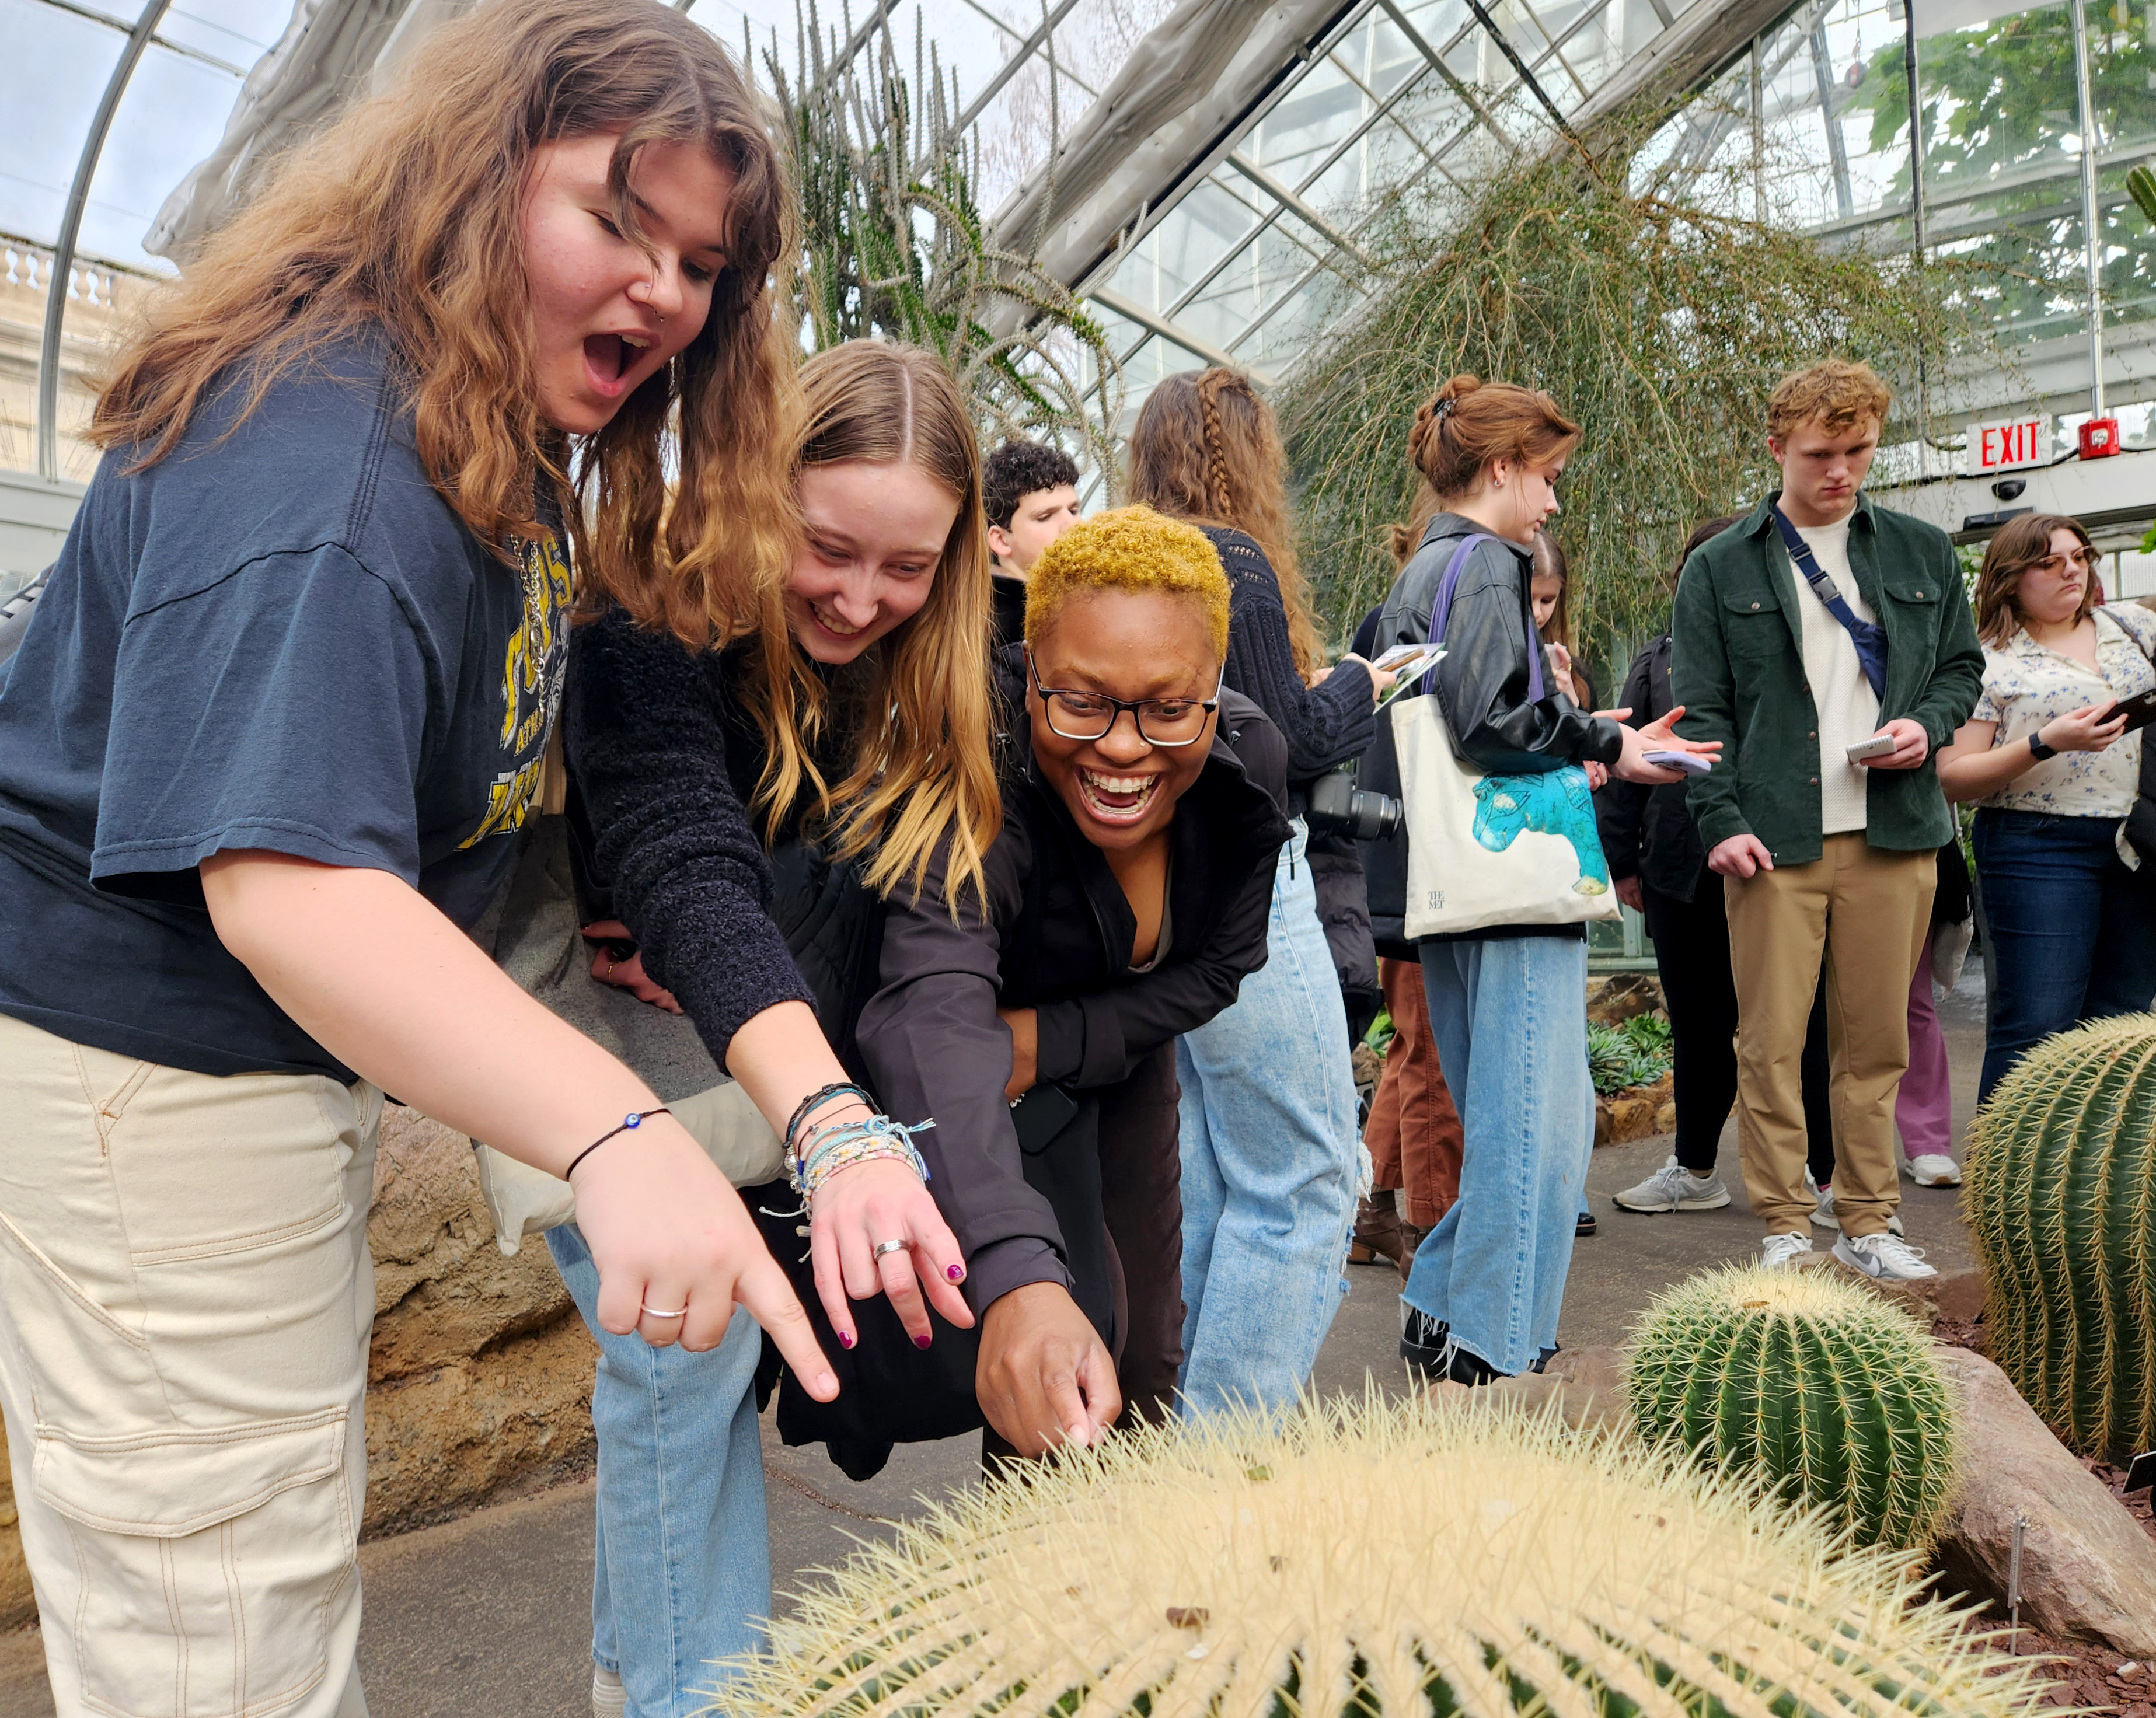 Three female students jokingly touch a large cactus' spines